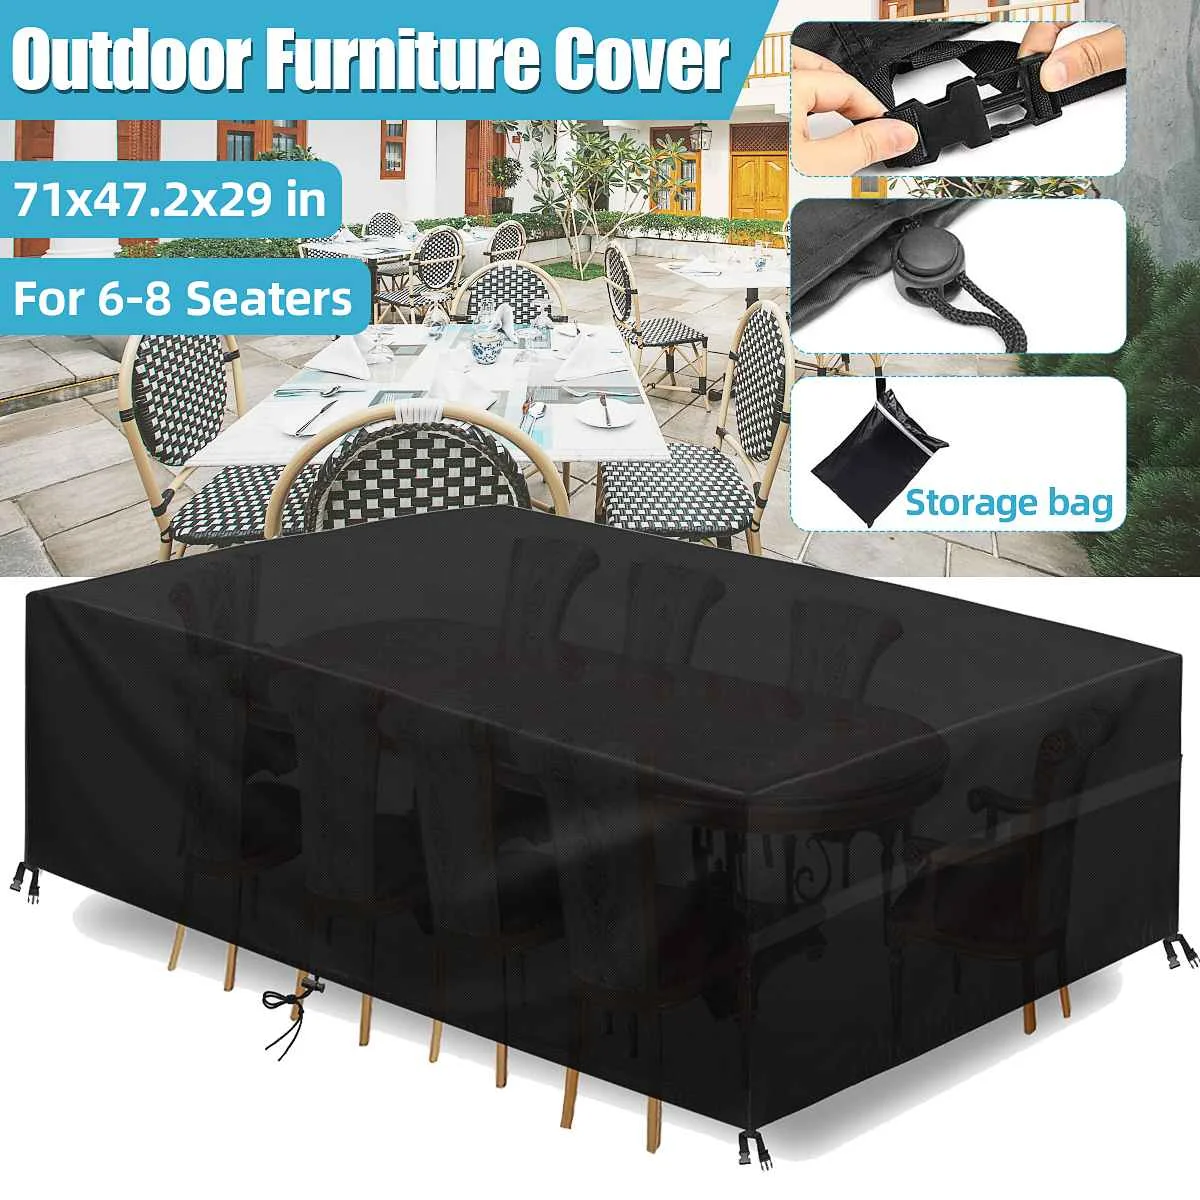 

For Garden Sofa 600D Outdoor Garden Furniture Cover Waterproof Table Chair Rainproof Dustproof Cover Patio Protective Covers